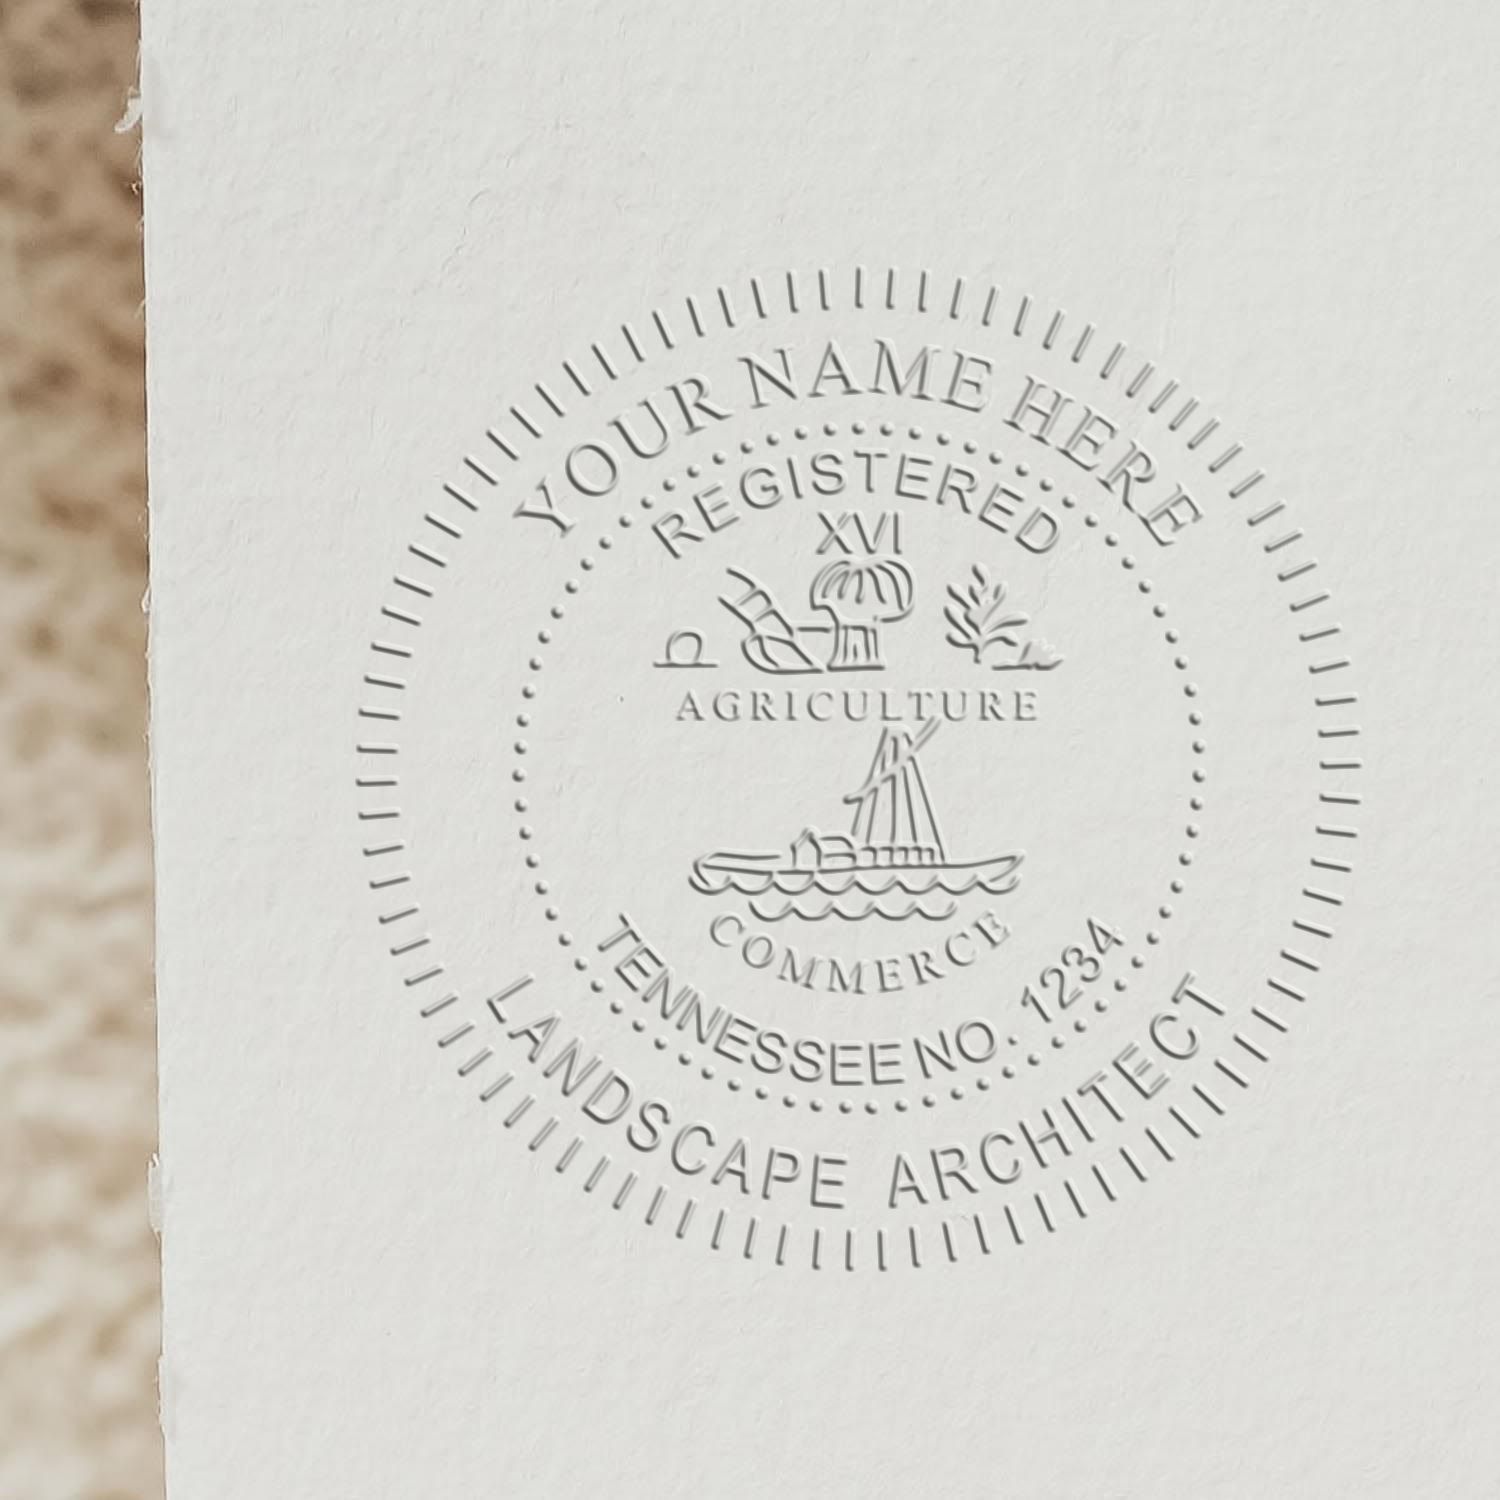 A photograph of the Tennessee Long Reach Landscape Architect Embossing Stamp stamp impression reveals a vivid, professional image of the on paper.